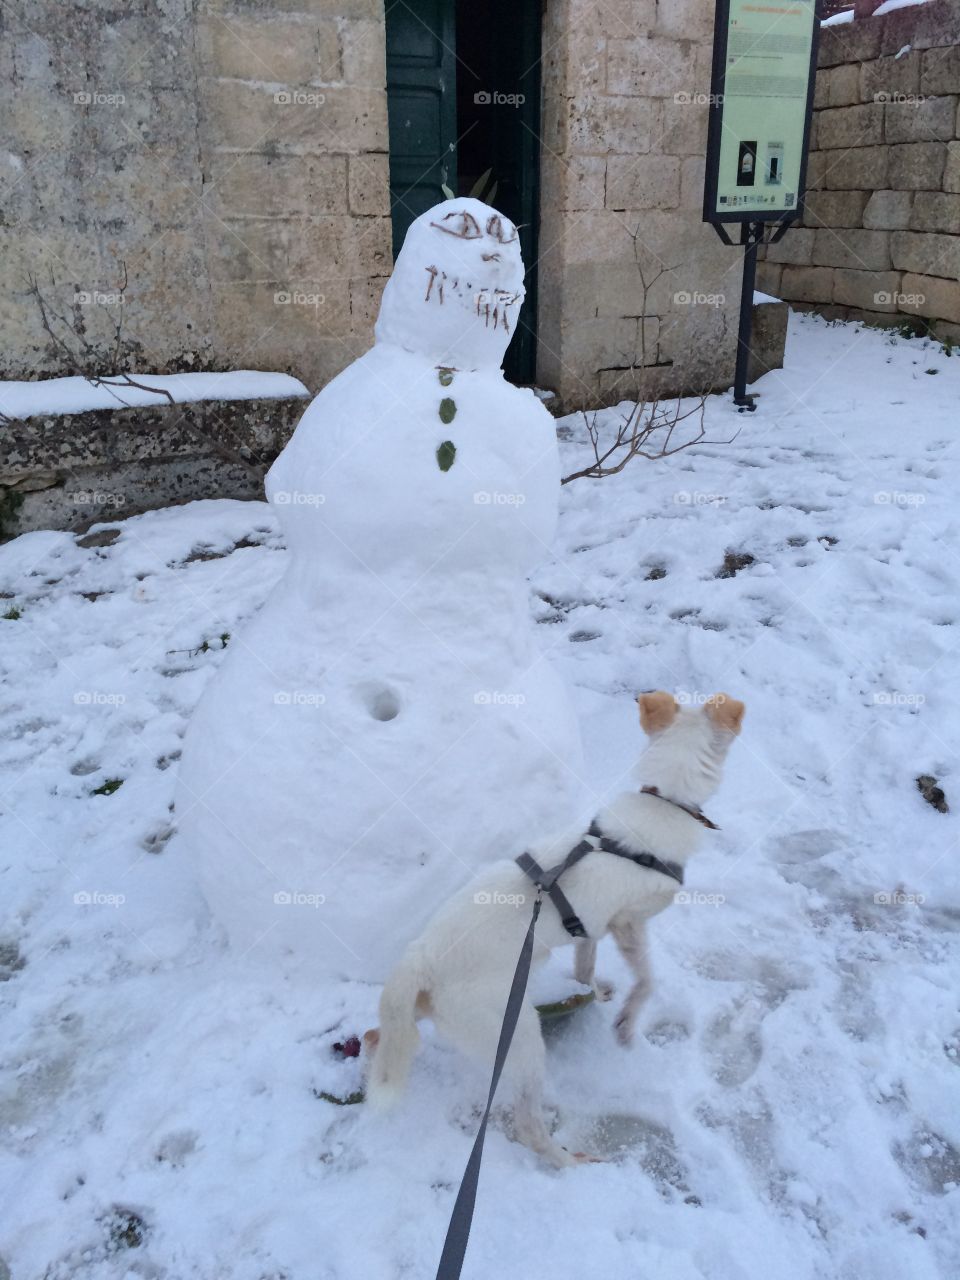 Snowman with my dog